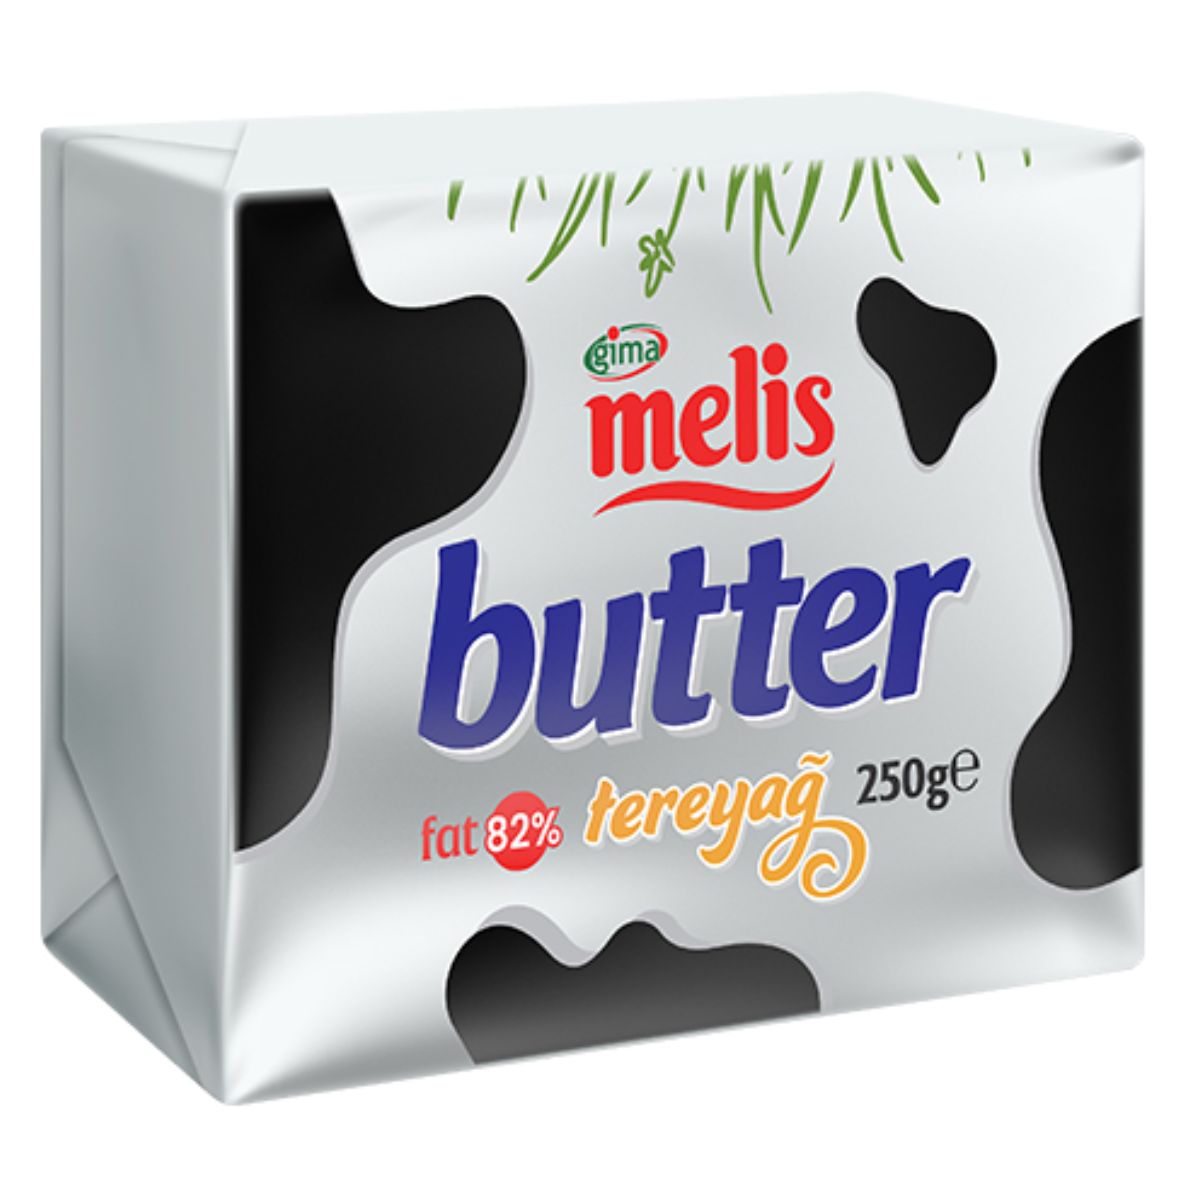 A box of Melis - Unsalted Butter - 250g on a white background.